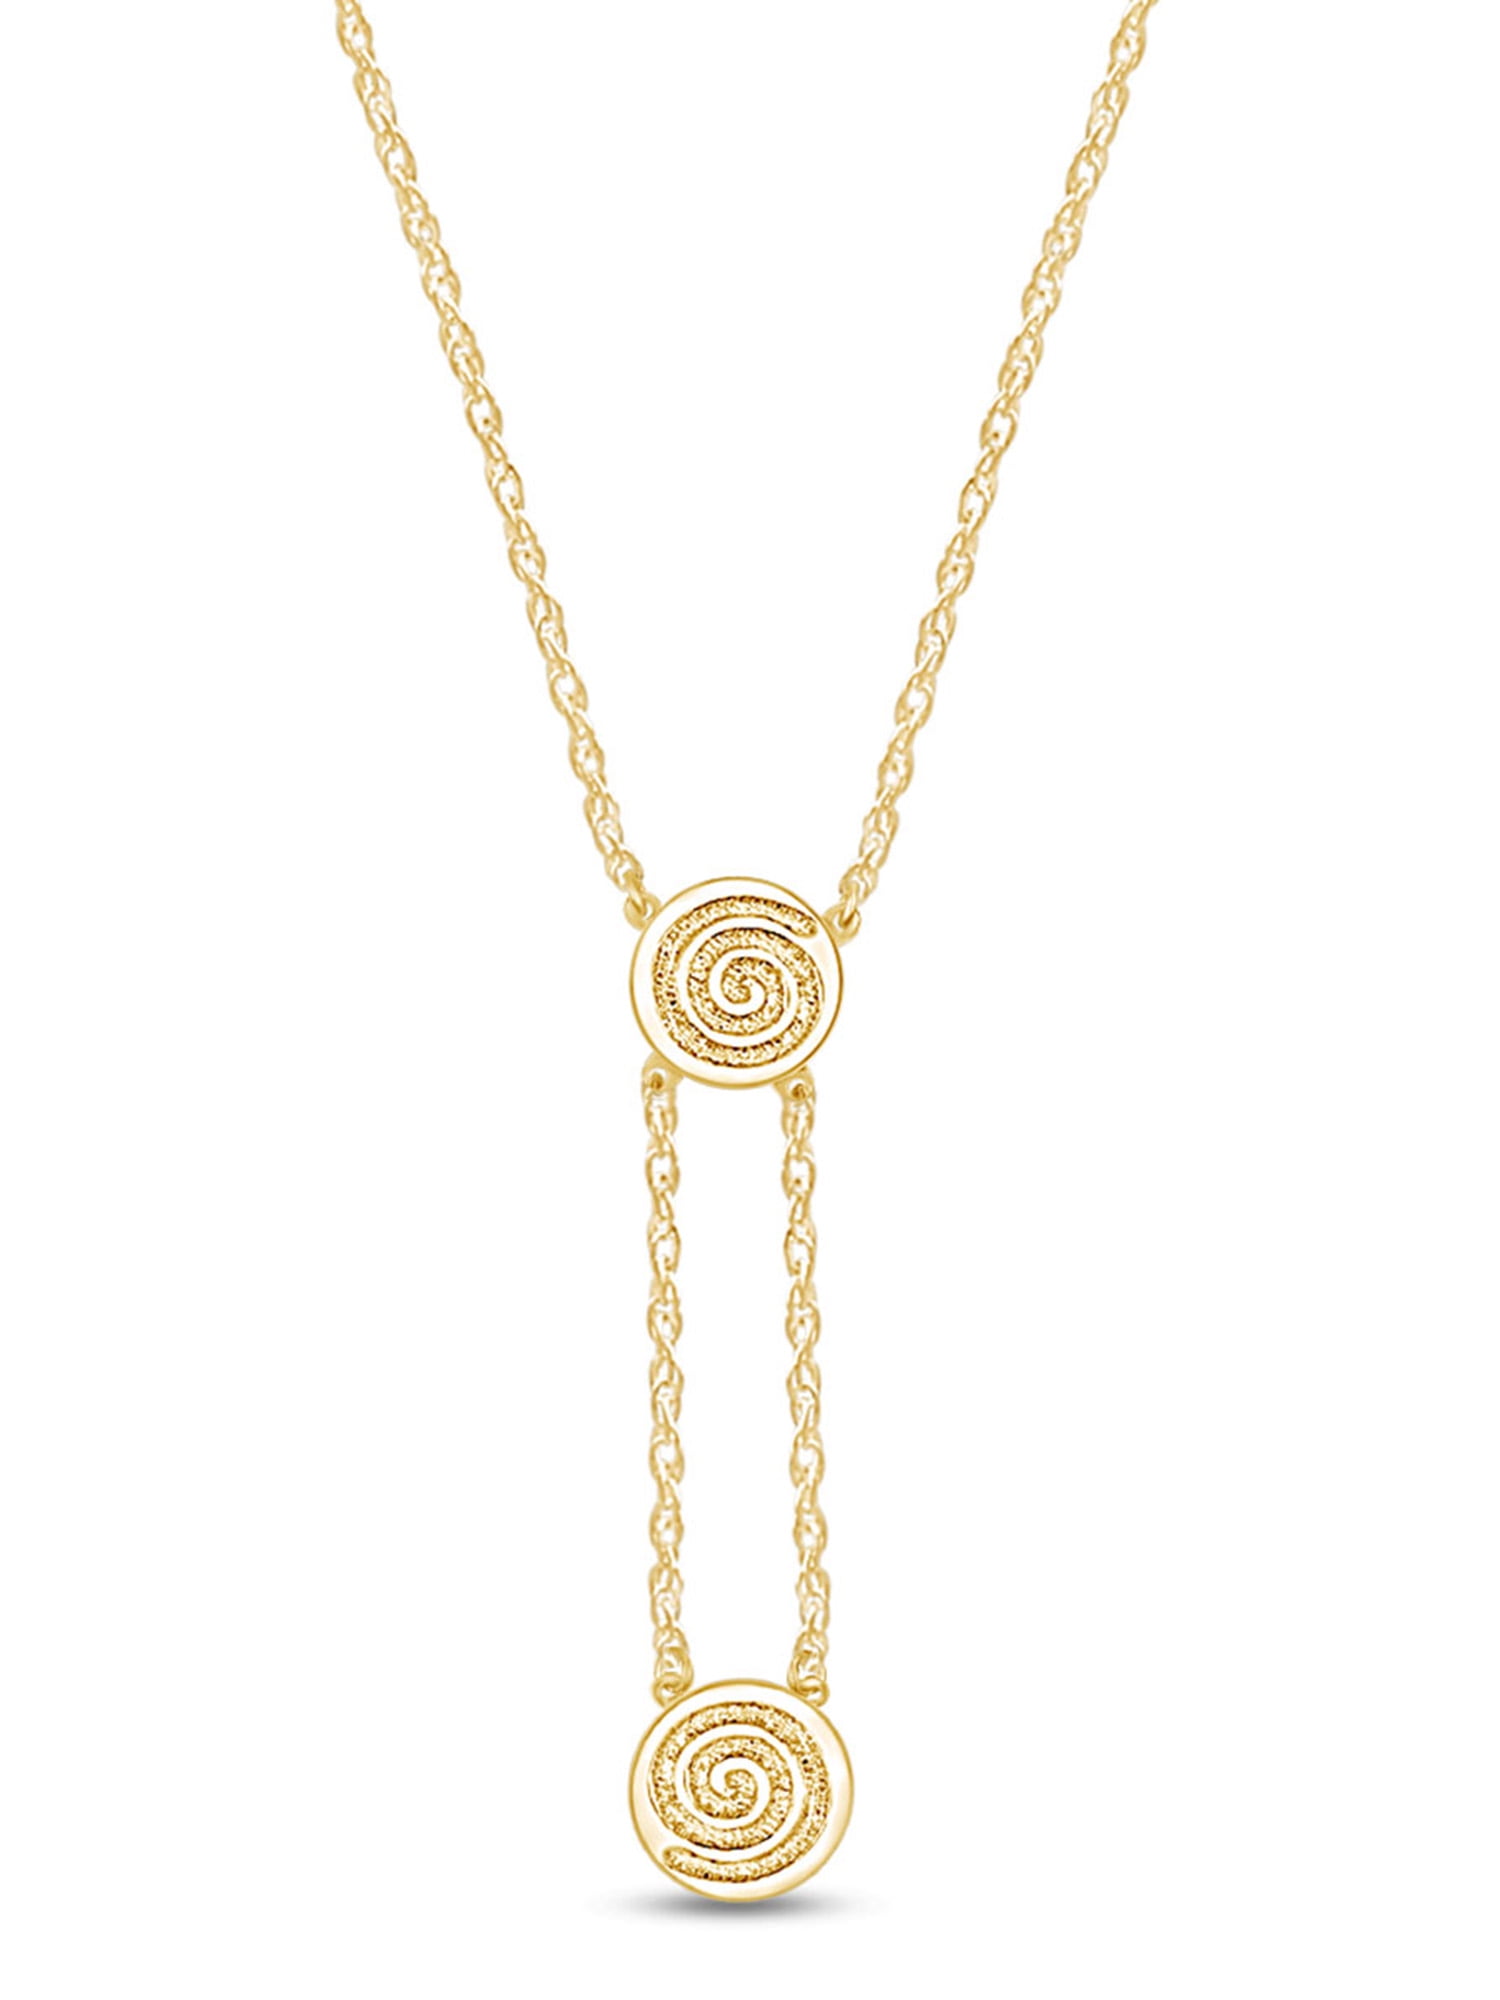 Celtic Single Spiral Necklace Pendant, 16 Inches